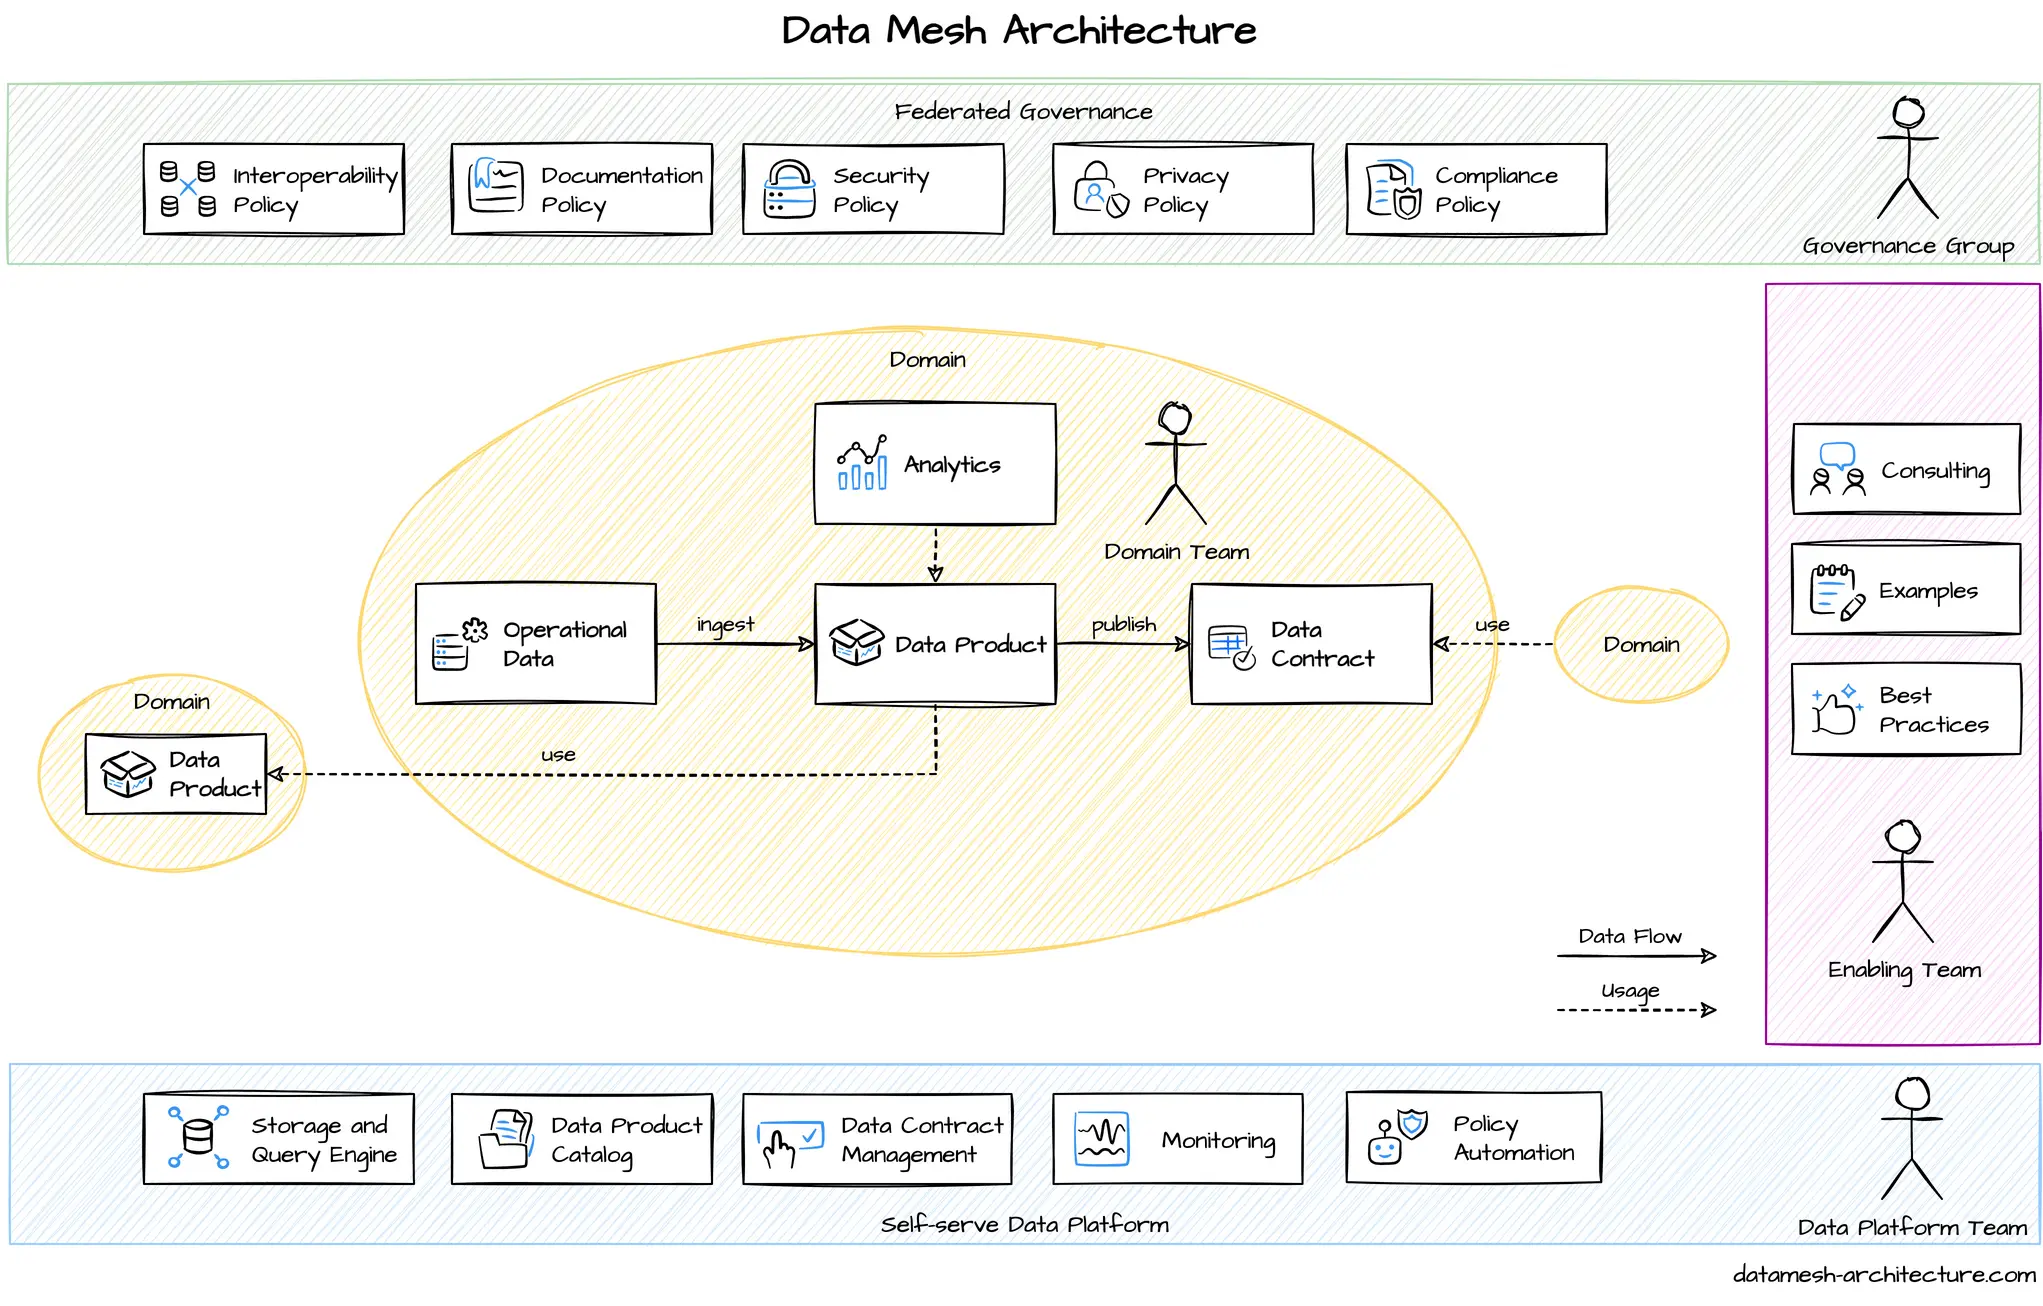 Data Mesh: The Four Principles of the Distributed Architecture